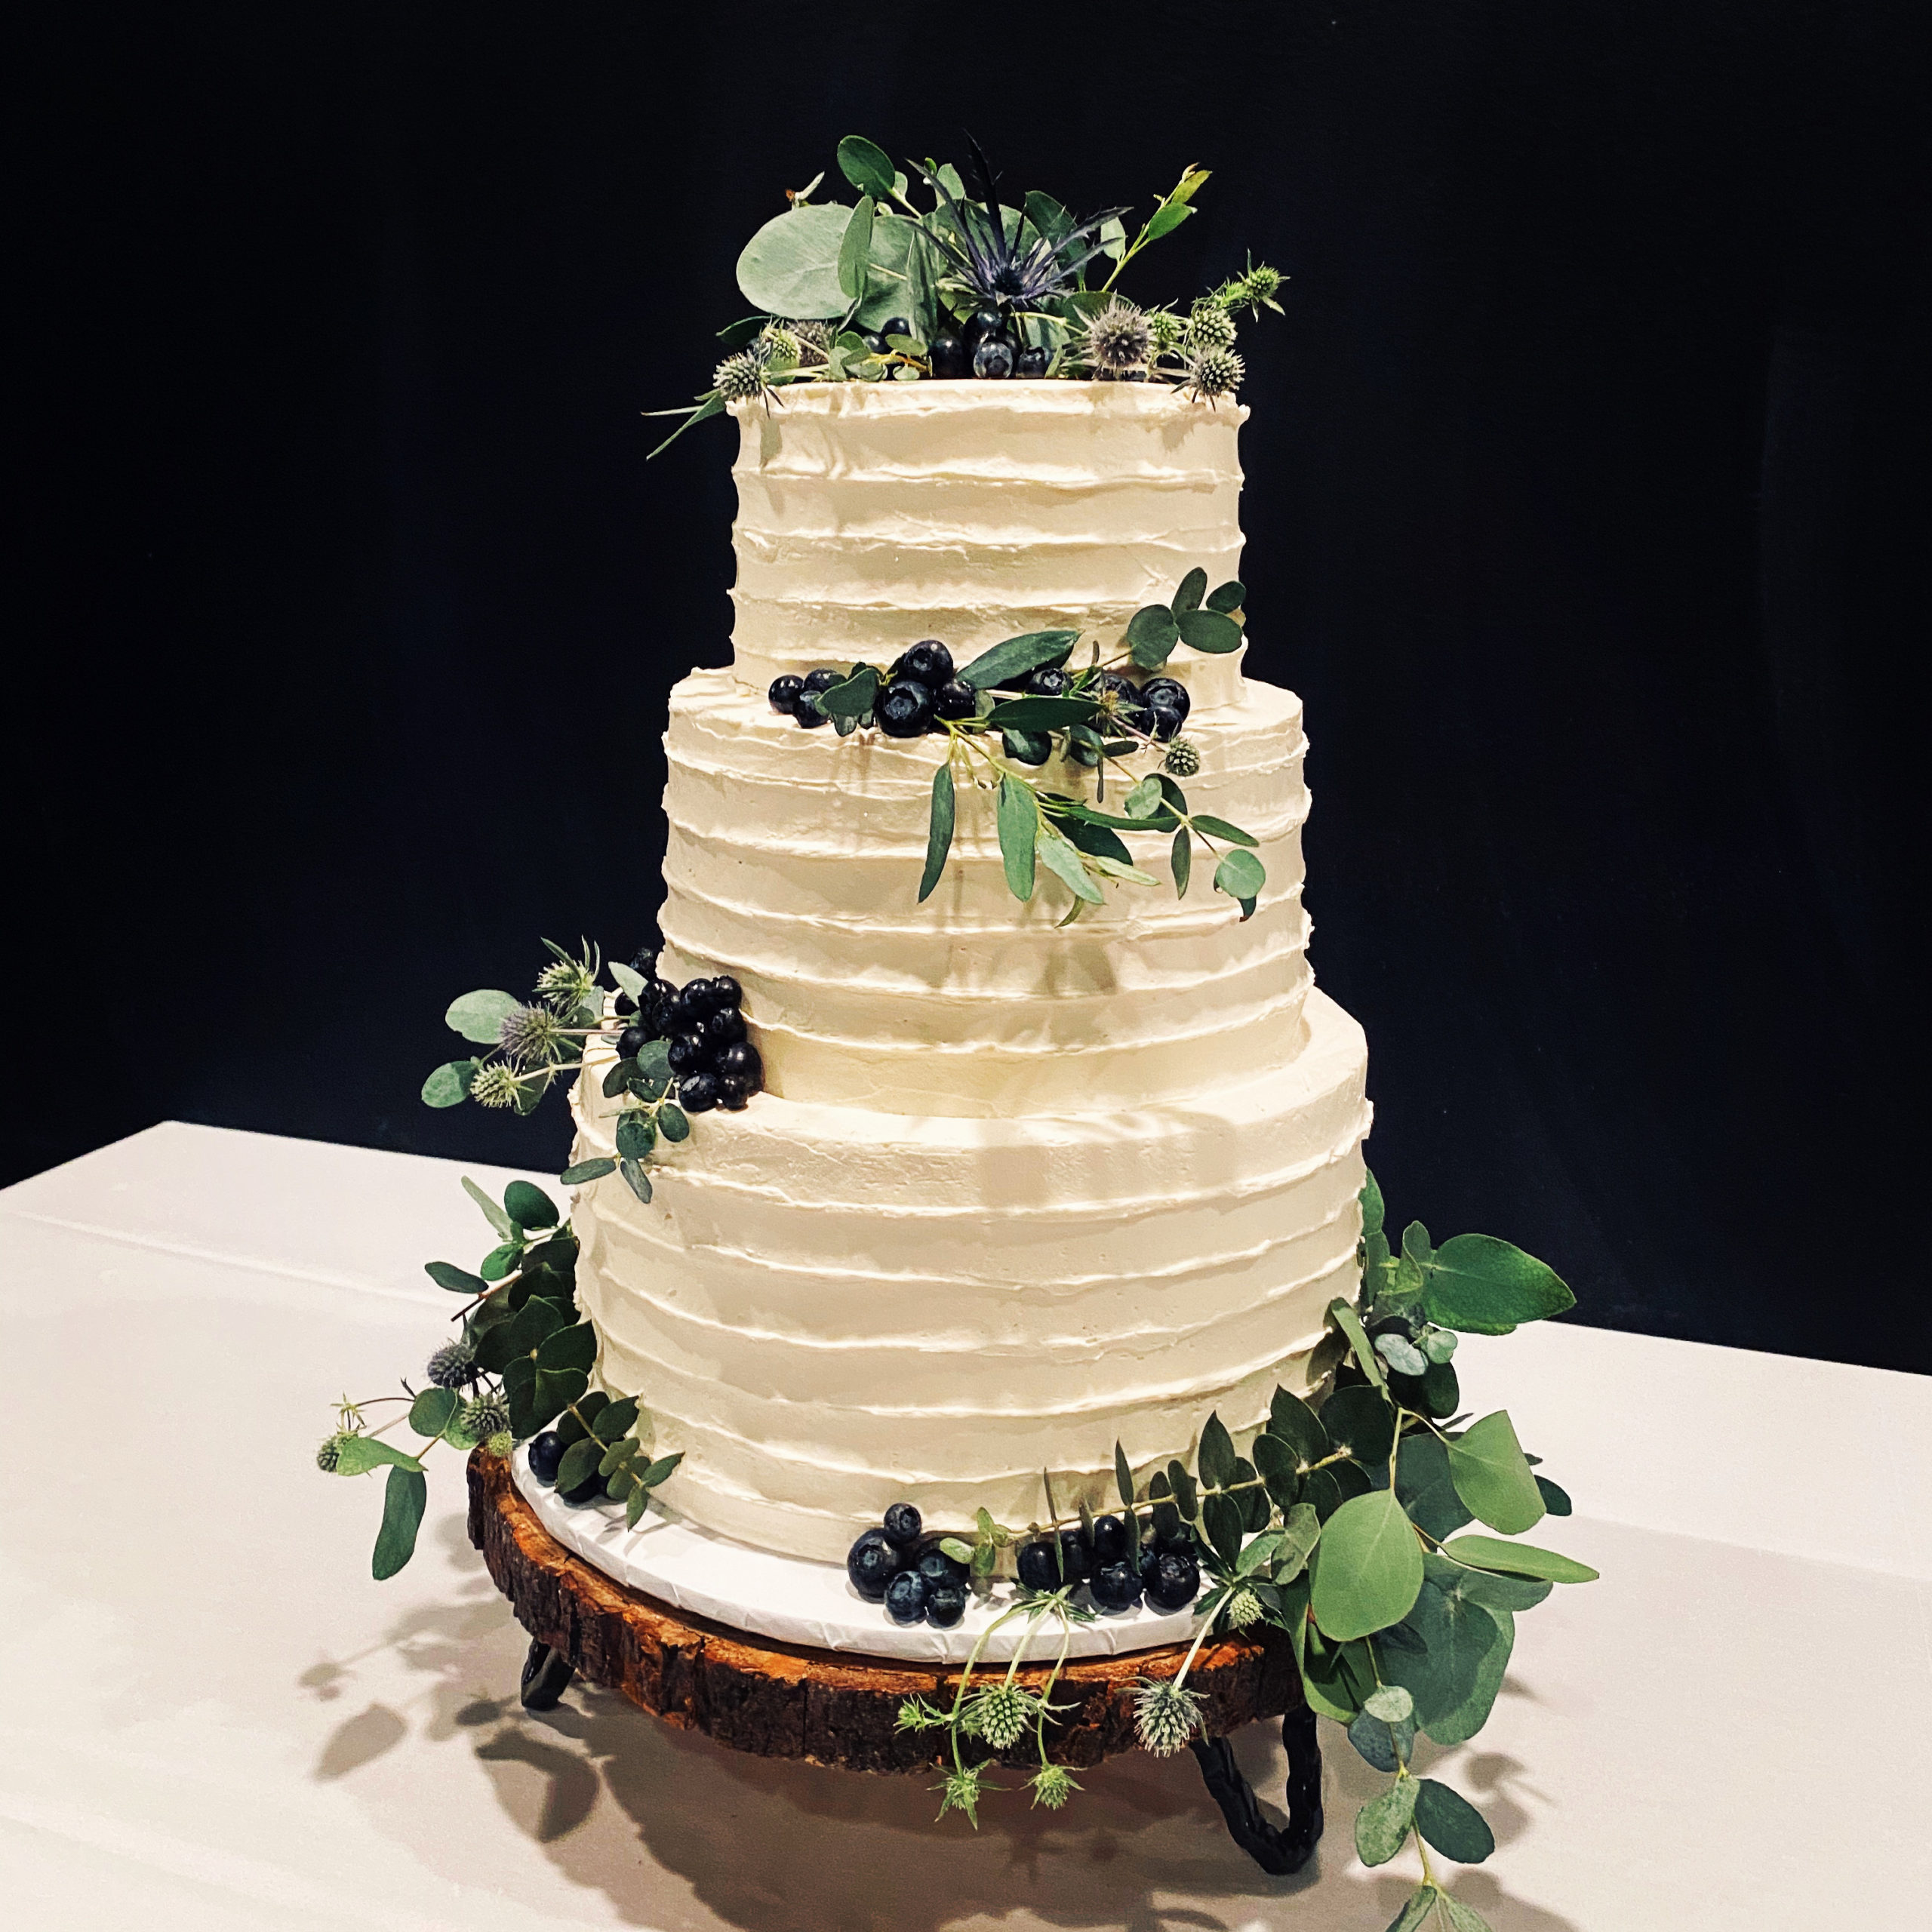 A beautiful 3-tier custom wedding cake with horizontal texture and fresh greenery from Village Patisserie in Toledo, Ohio